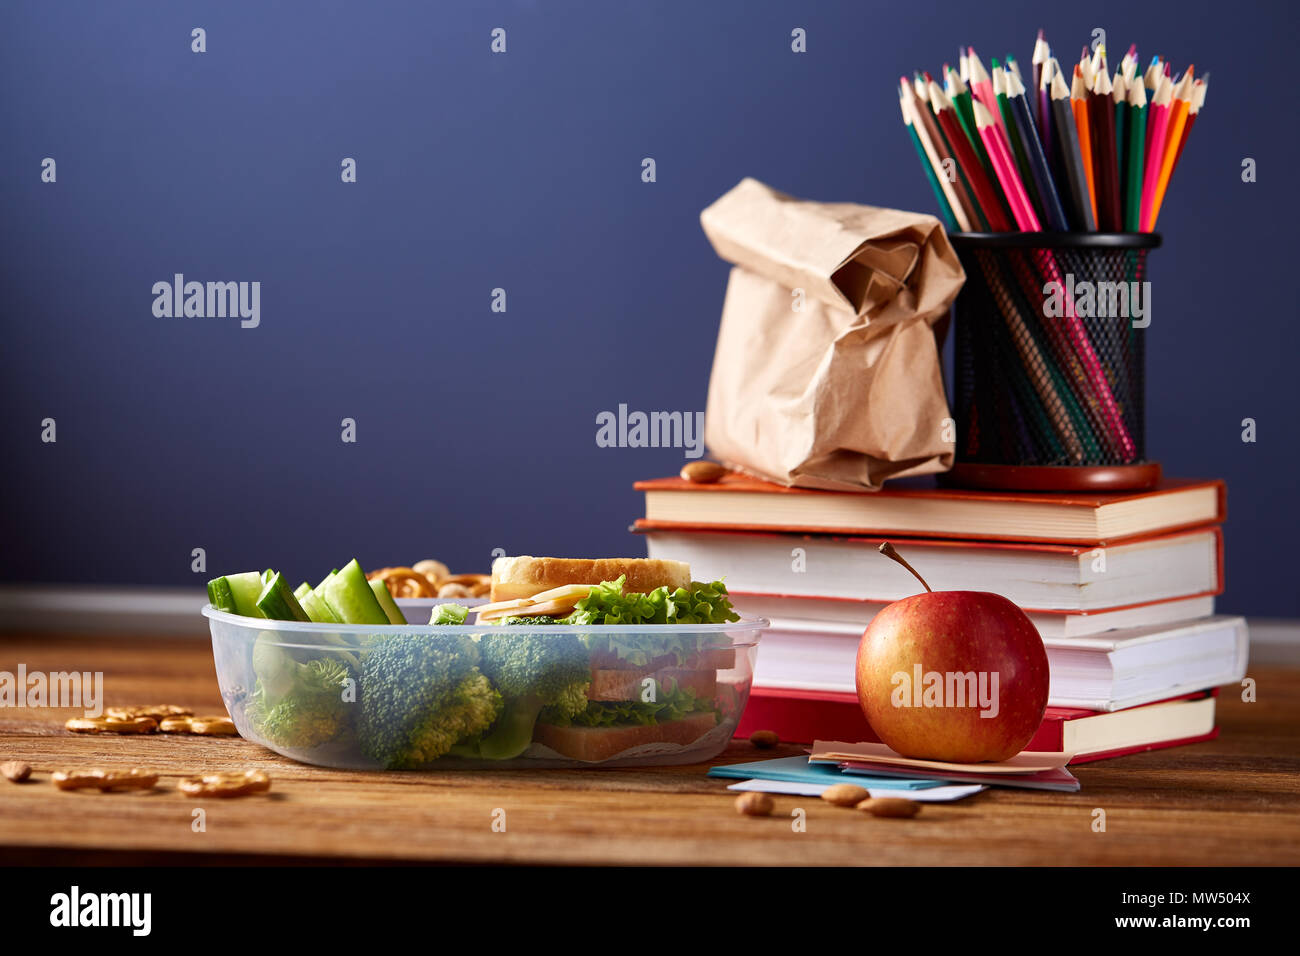 Back to School concept, school supplies, assortment of biscuits and transparent lunchbox full of sandwich, fruits and vegetables togather with assortm Stock Photo